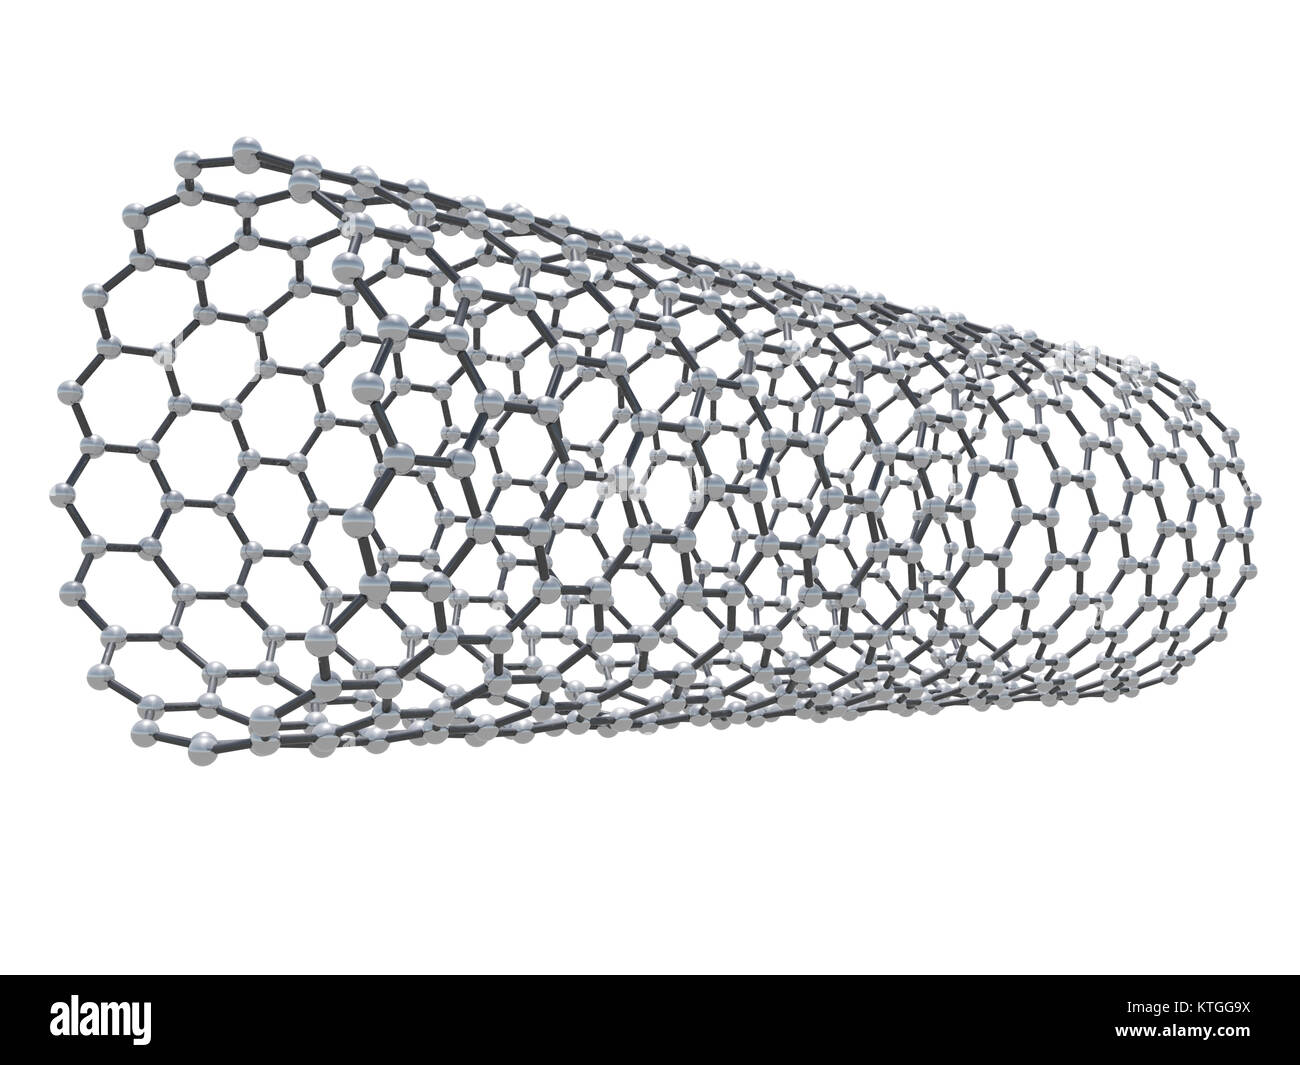 Carbon nanotubes molecule structure, atoms in wrapped hexagonal lattice isolated on white background, 3d illustration Stock Photo